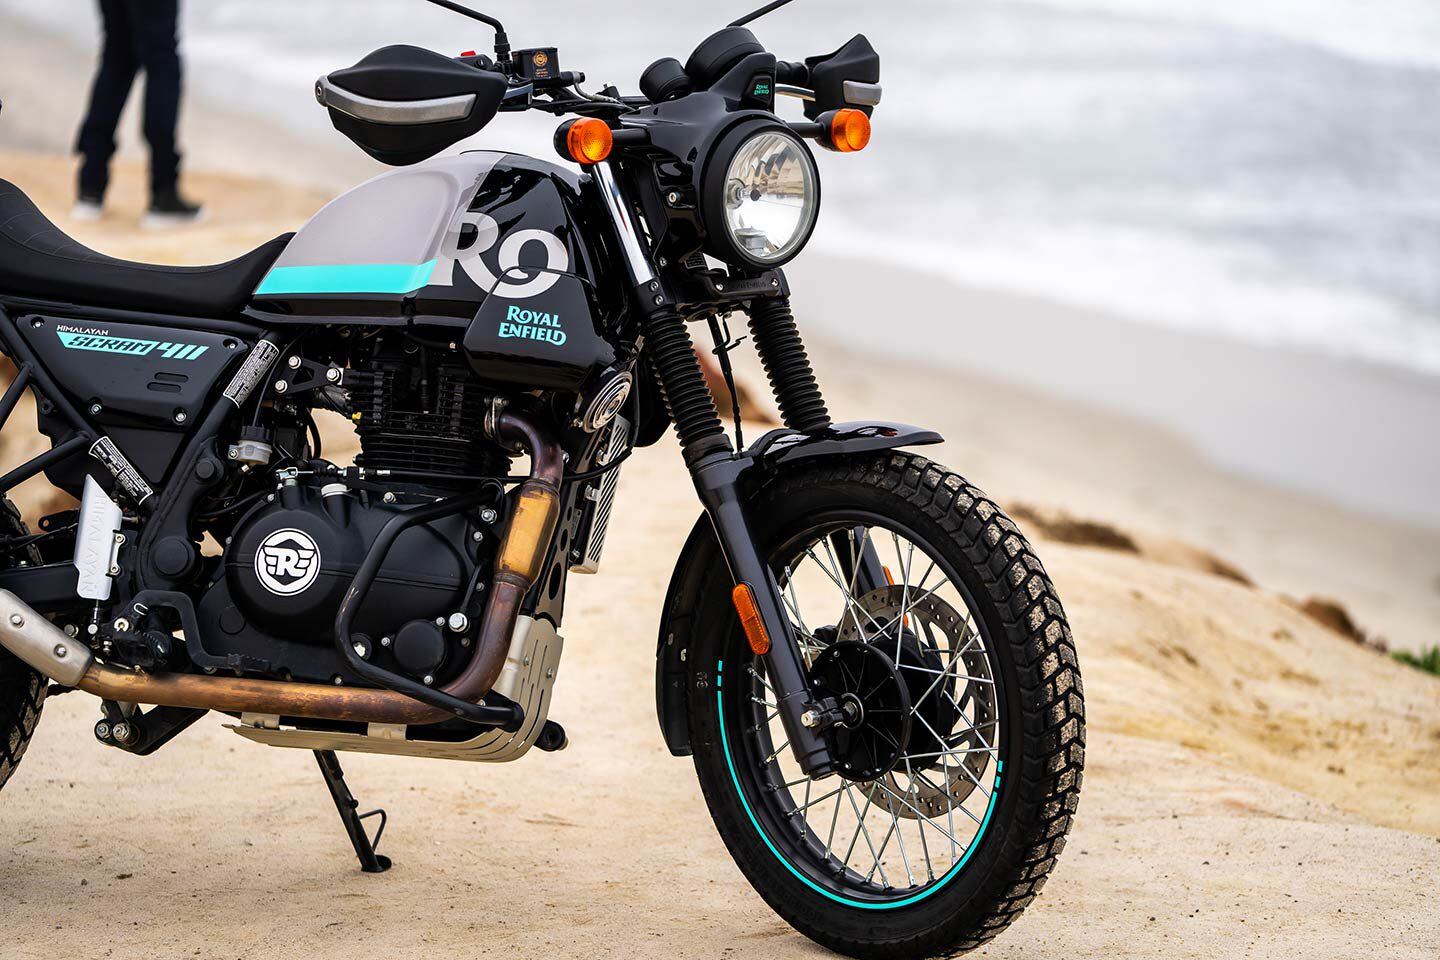 In traditional scrambler spirit, the Scram rolls on a larger-diameter spoked 19-inch front wheel similar to a flat-track bike.